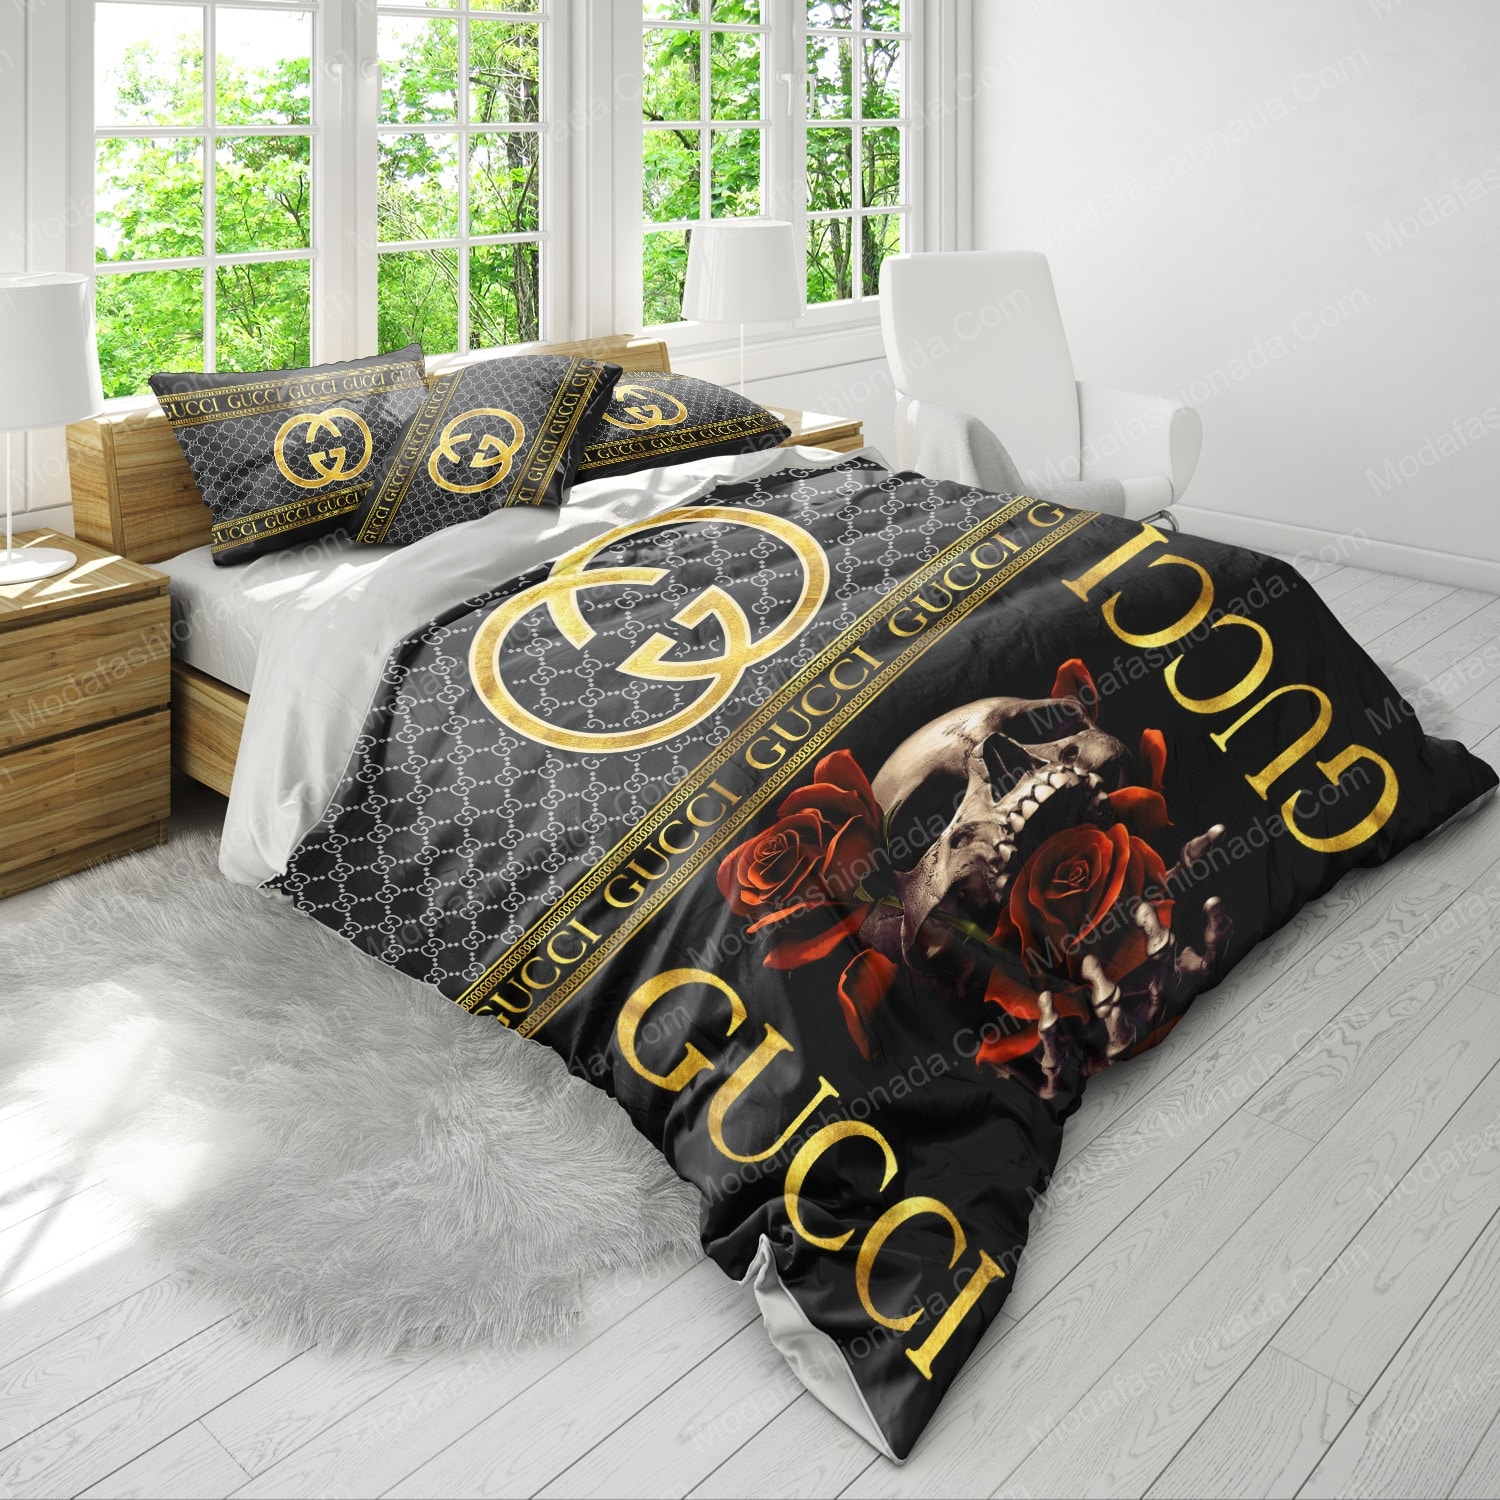 Buy Gucci Skull And Roses Bedding Sets Bed Sets With Twin, Full, Queen ...